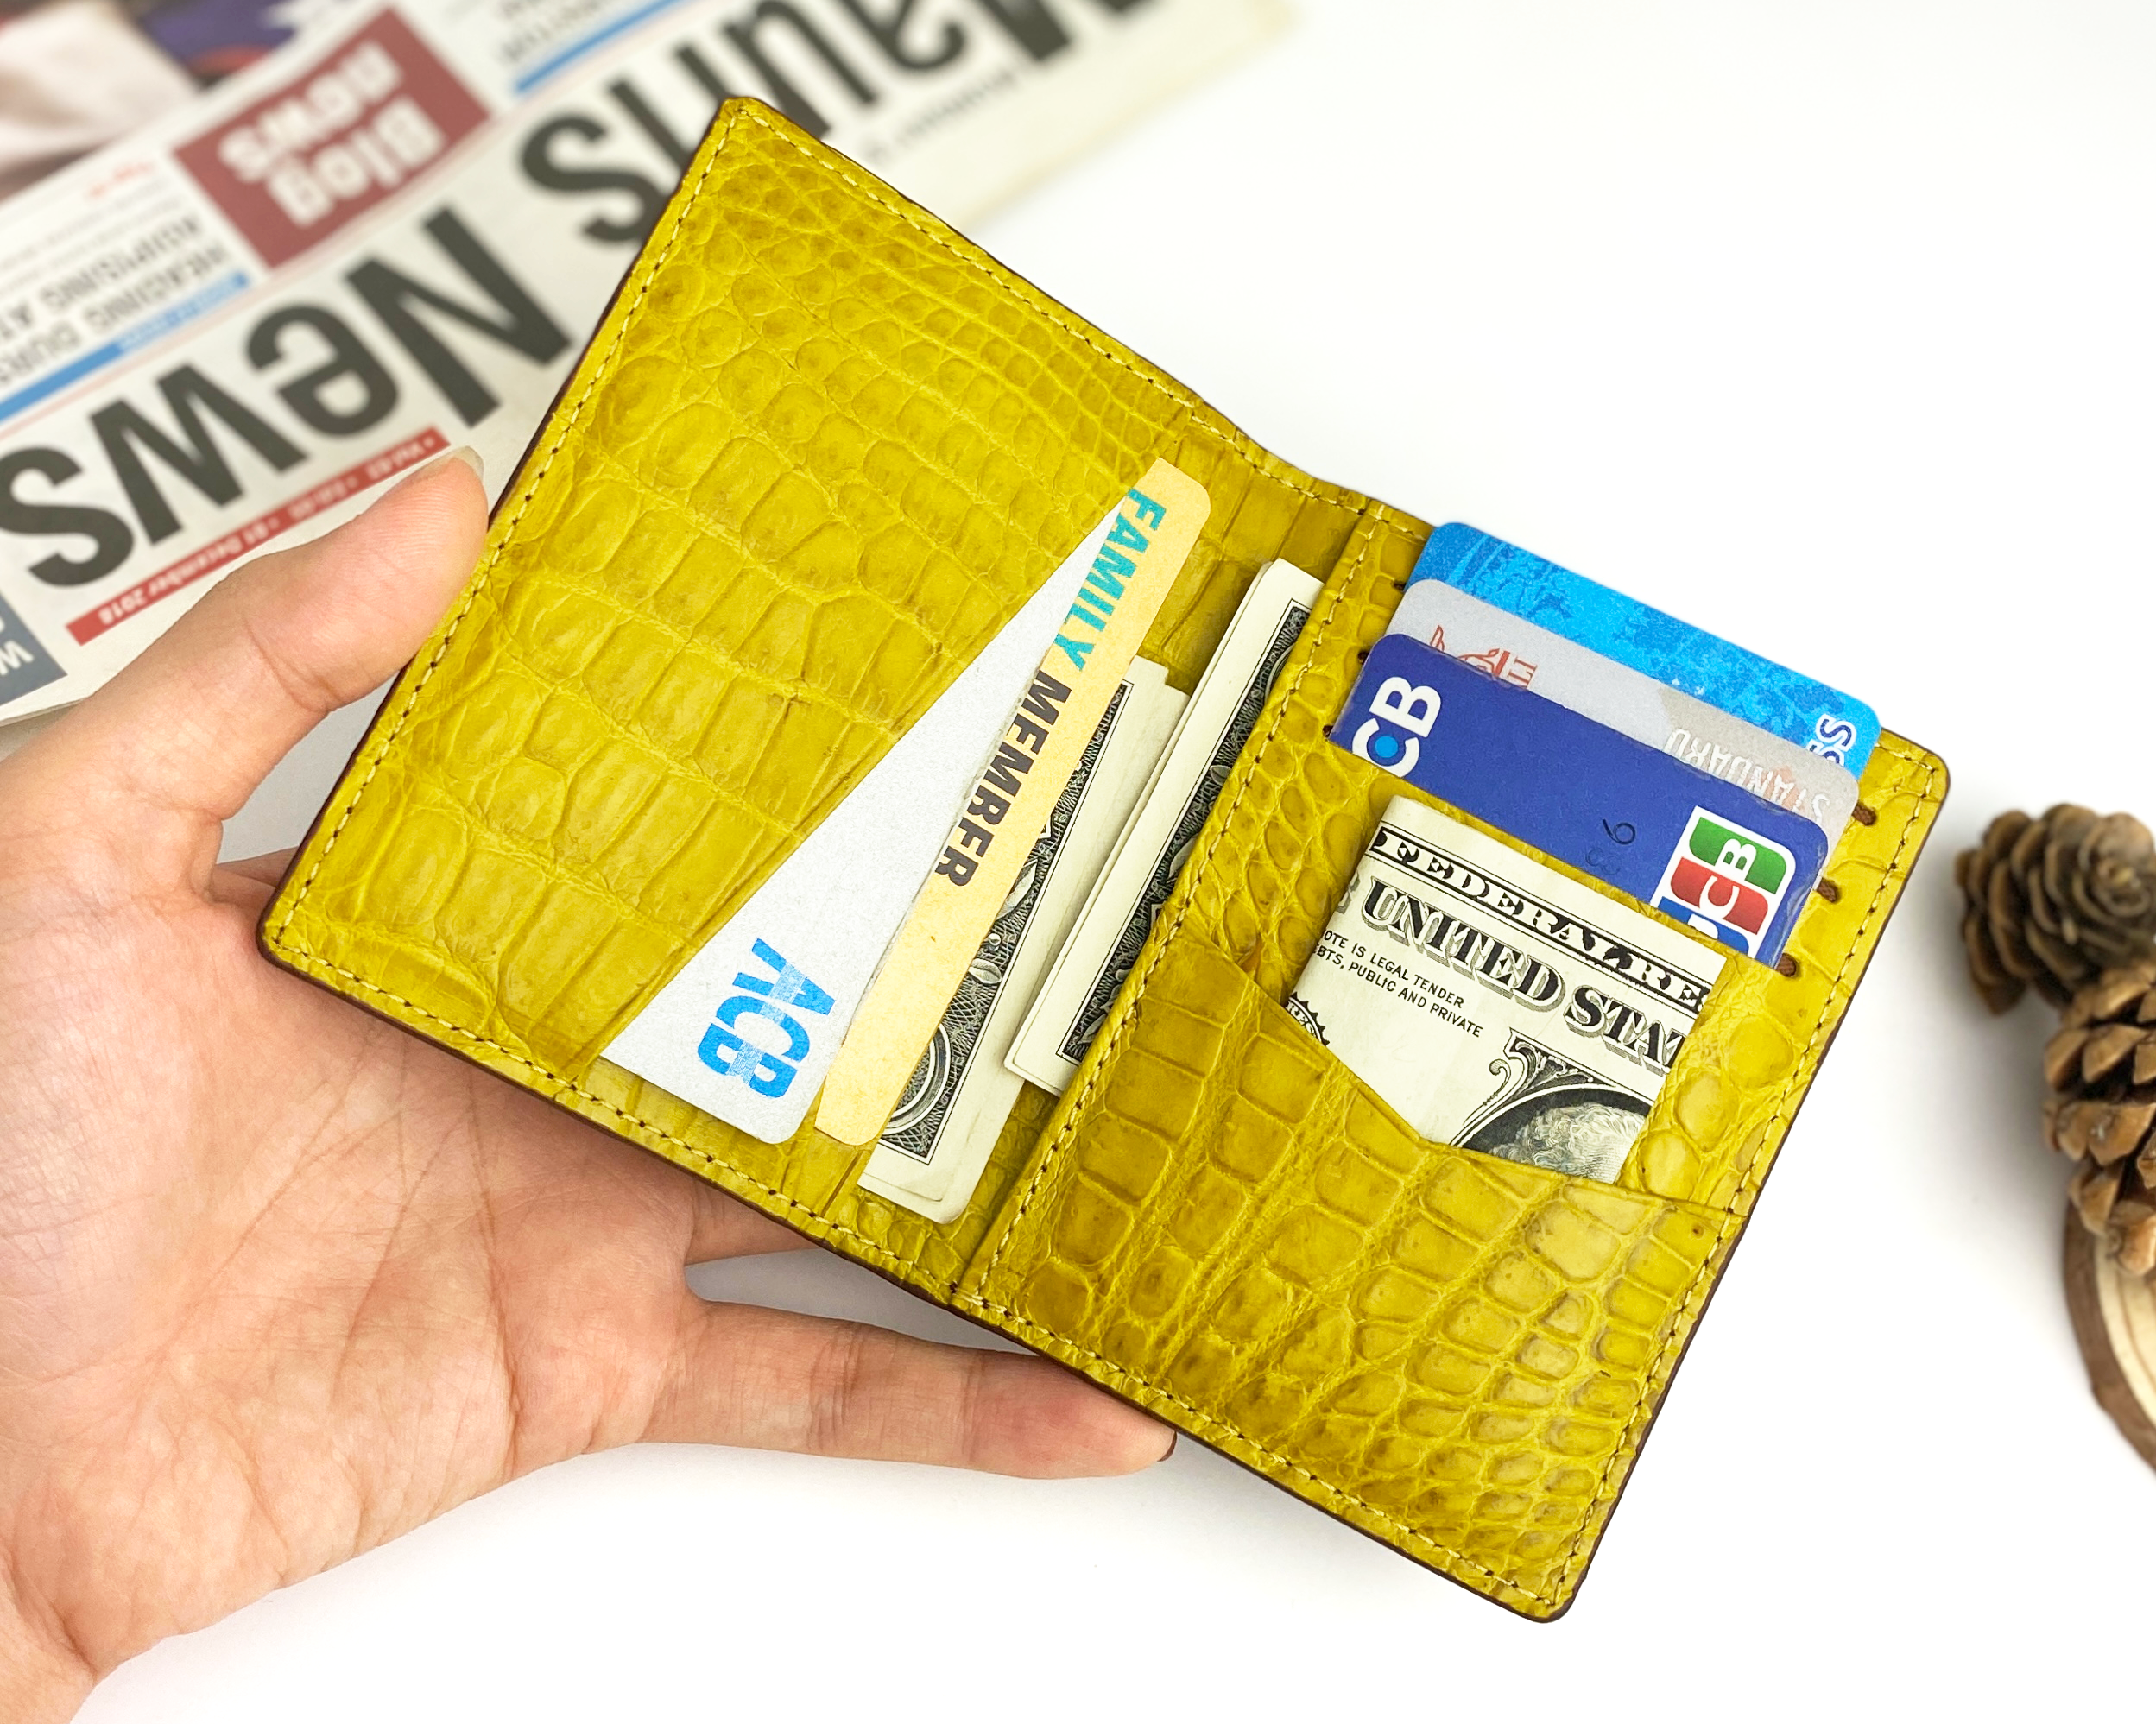 Brown & Yellow Double Side Alligator Leather Credit Card Holder | RFID Blocking | CARD-39